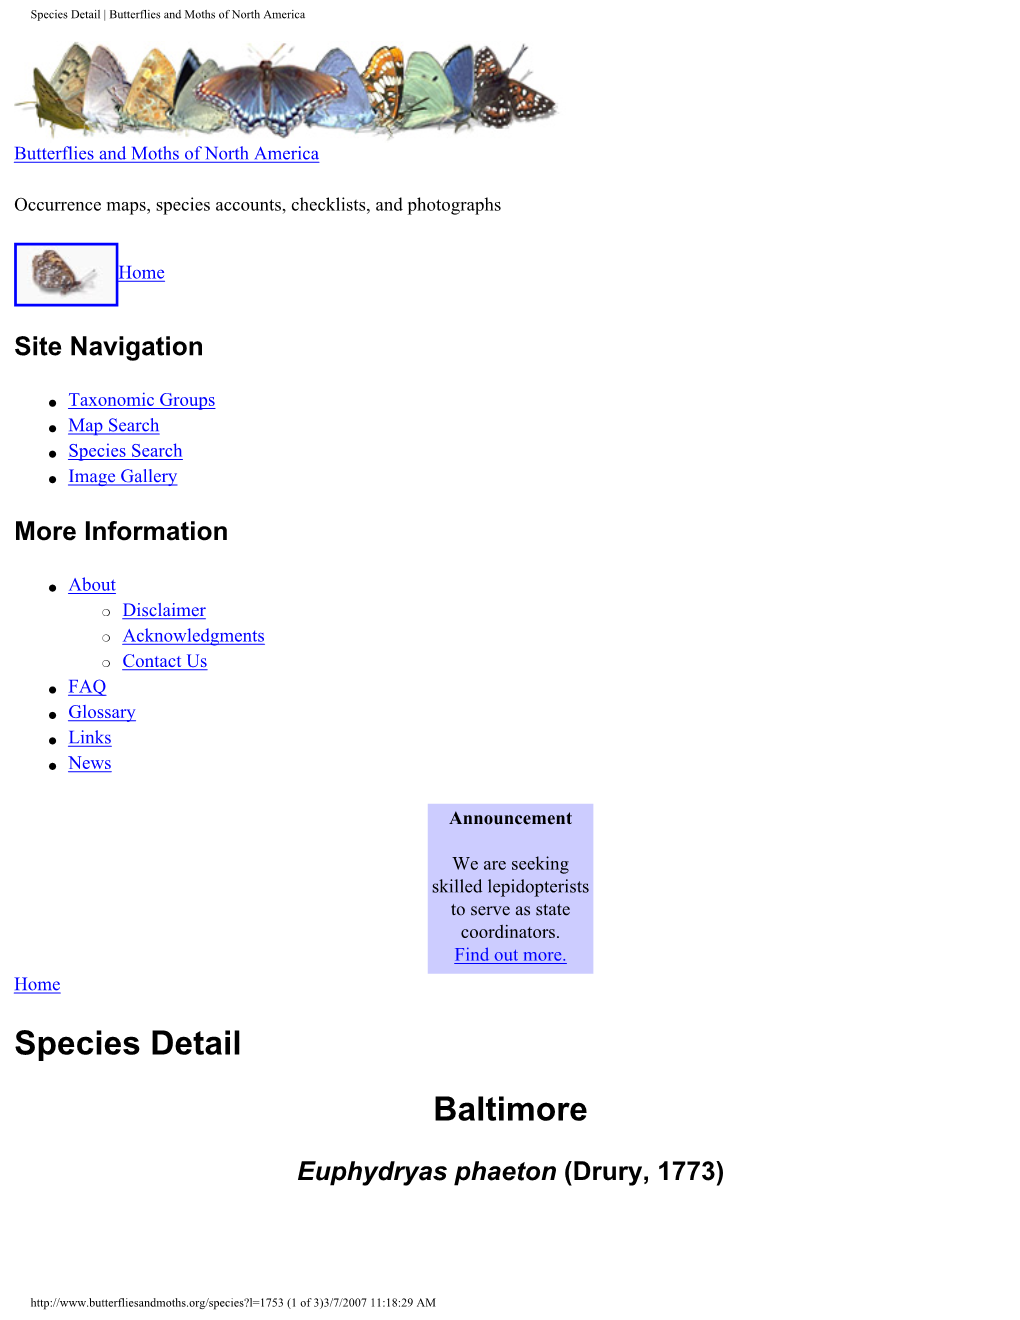 Butterflies and Moths of North America, Baltimore Species Detail